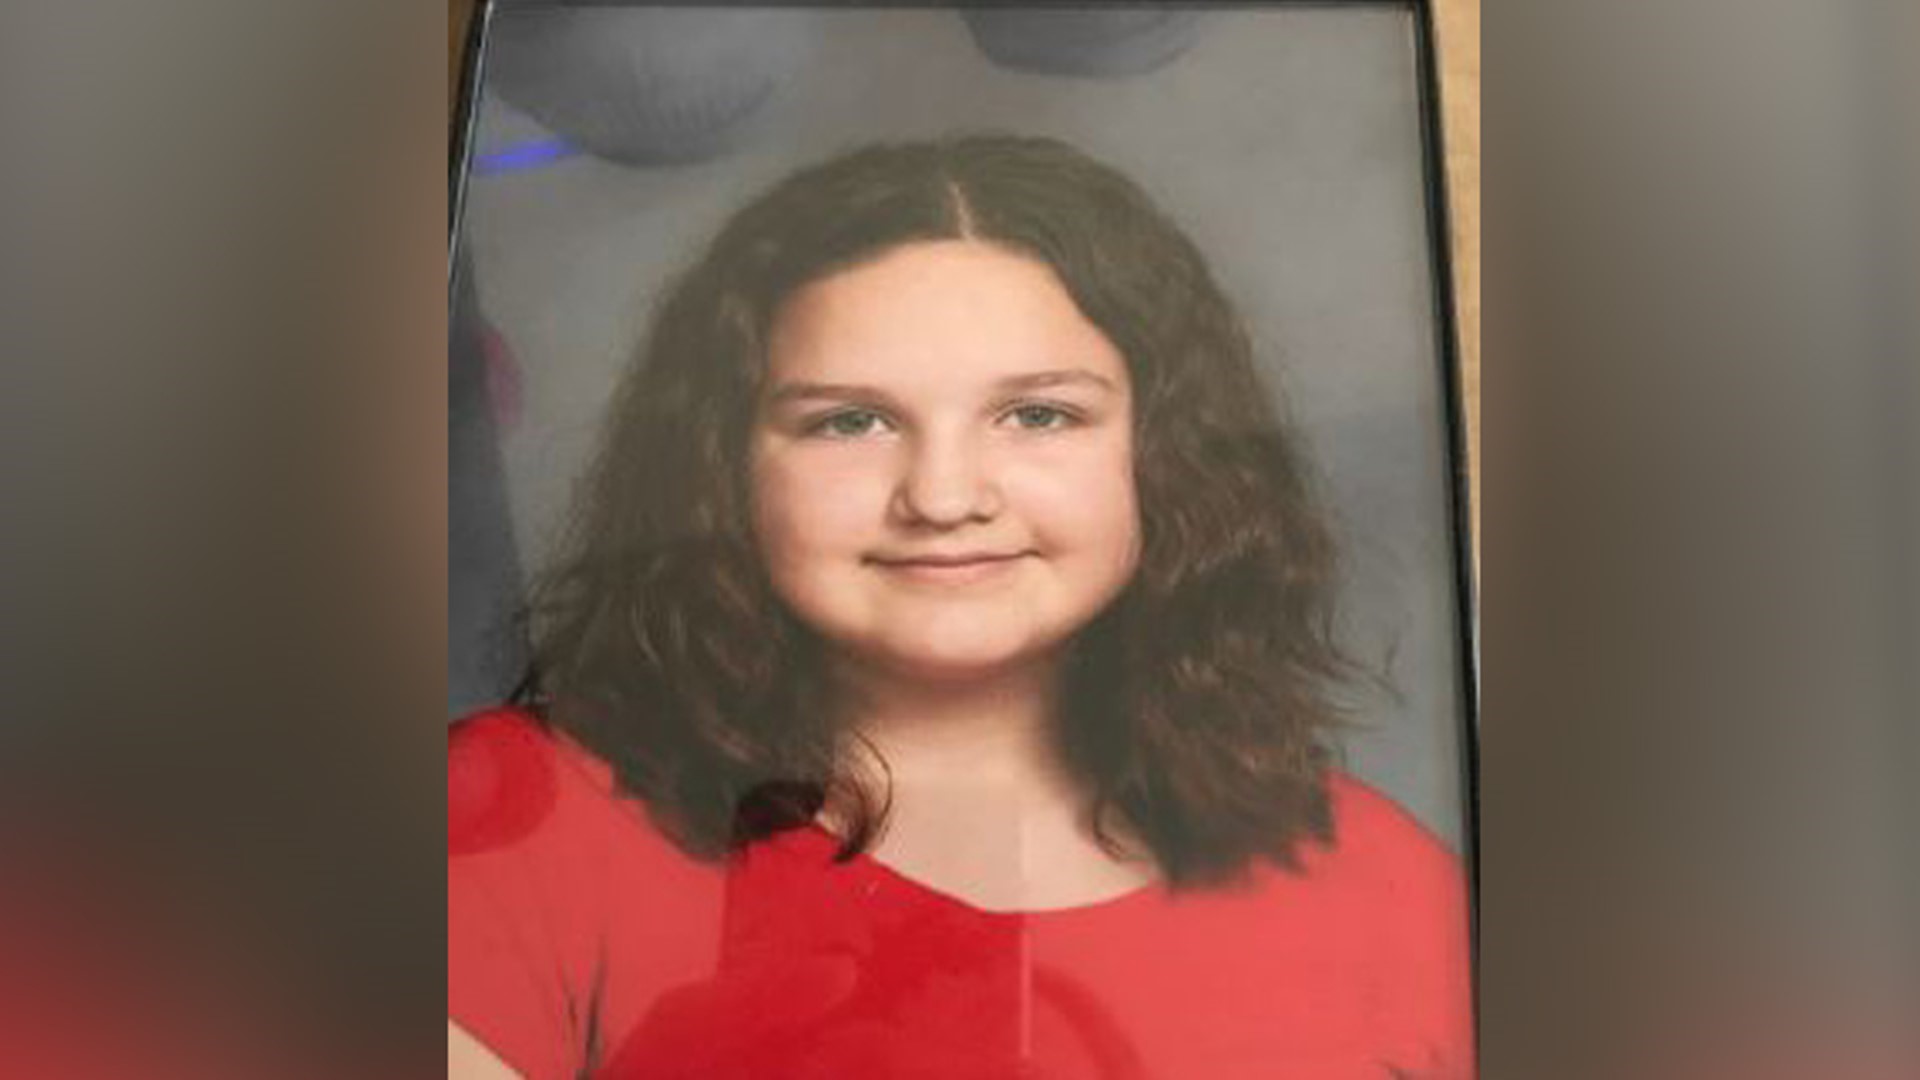 Whitehall Police Searching For Missing 13 Year Old Girl